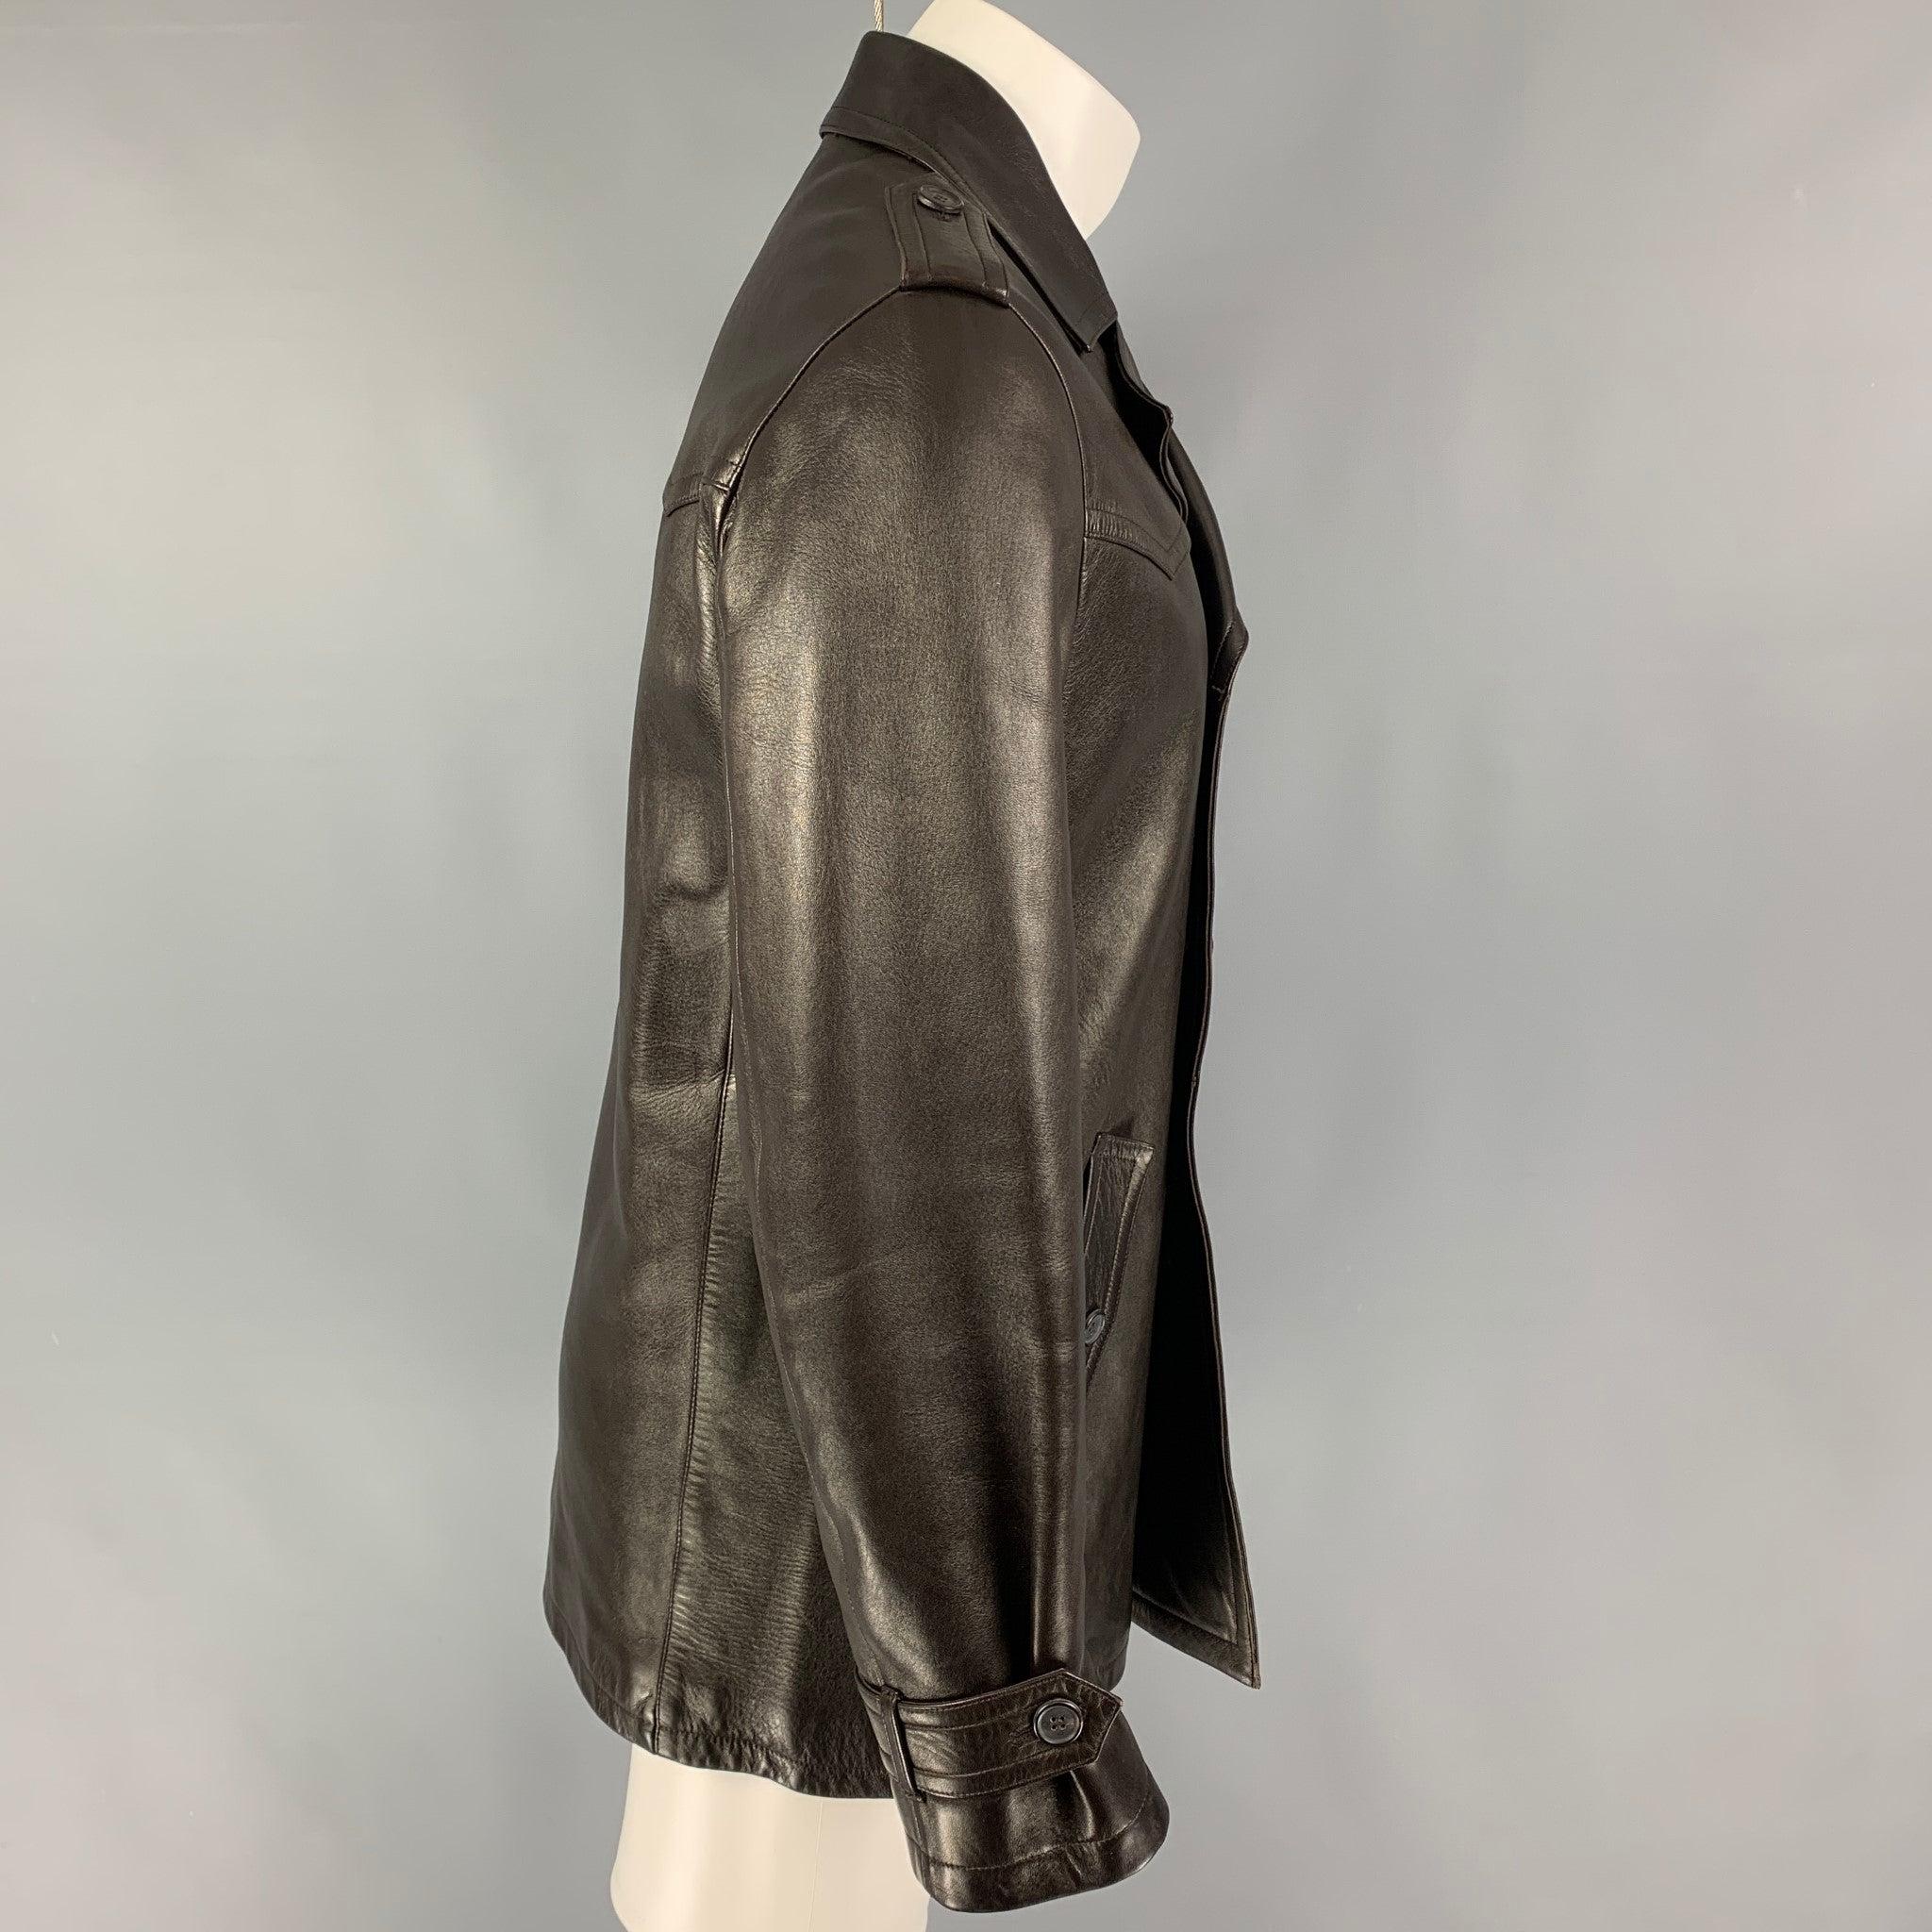 NEIL BARRETT coat comes in a dark brown leather with a full liner featuring flap pockets, epaulettes, large lapel, and a double breasted closure.
Very Good
Pre-Owned Condition. 

Marked:   M  

Measurements: 
 
Shoulder: 18 inches Chest:
40 inches